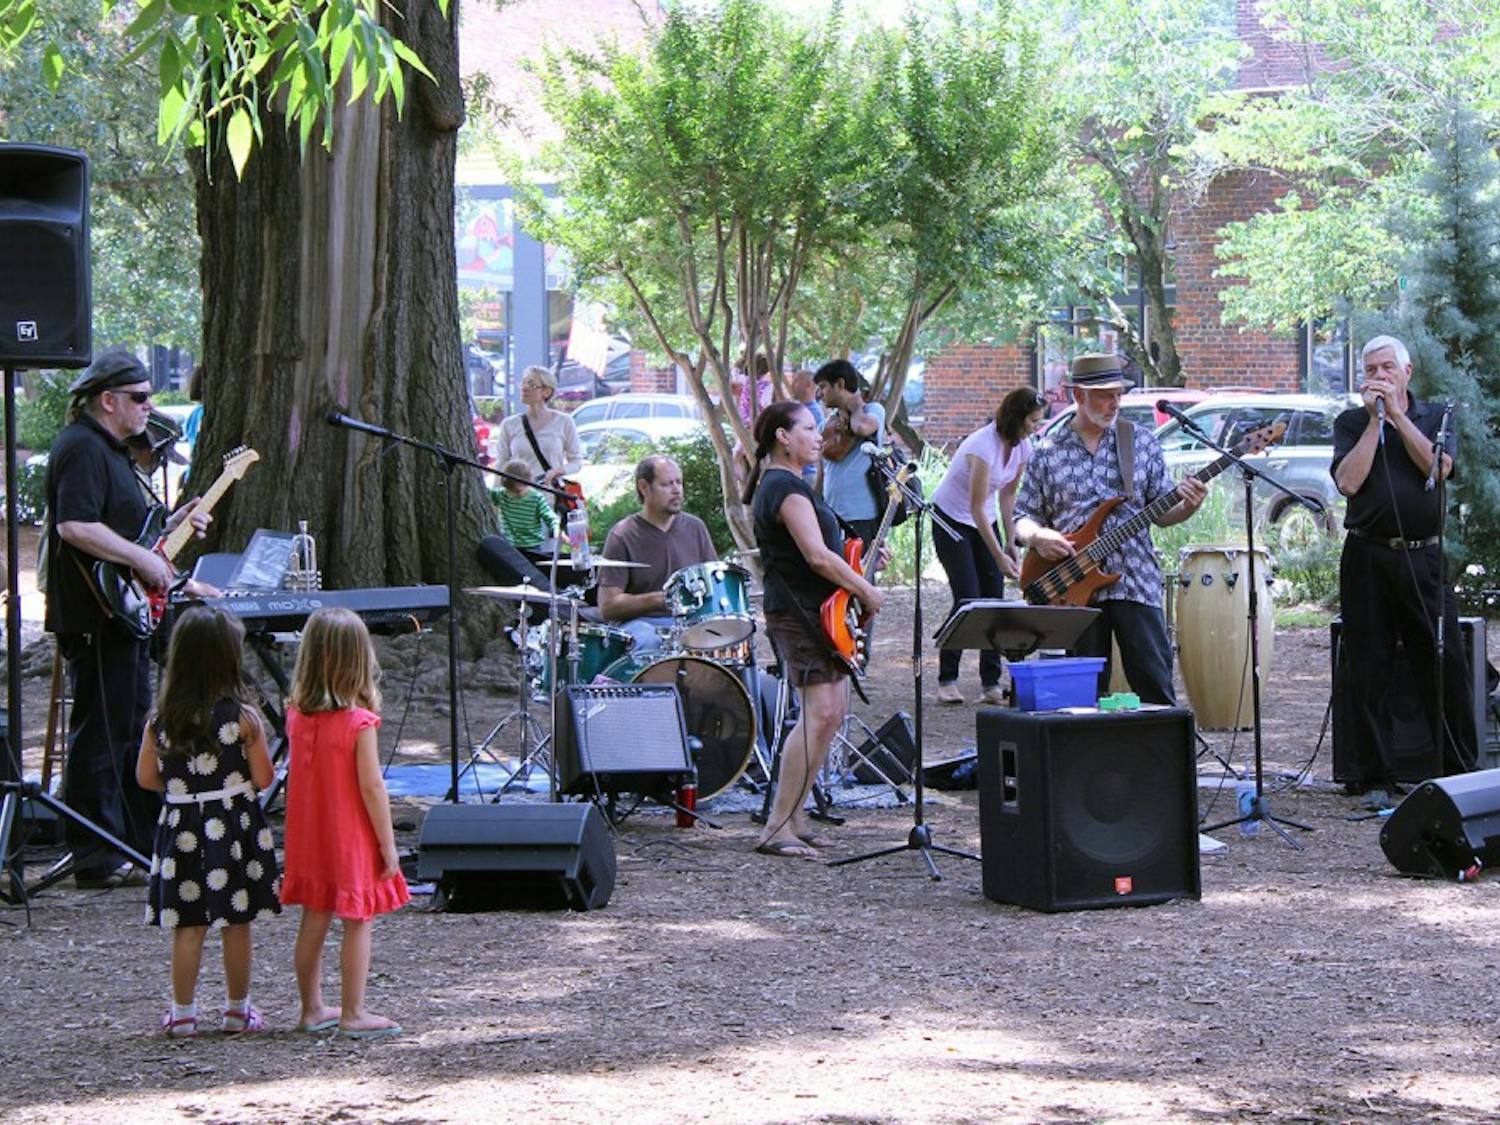 Rhonda Robichaux and her band plays for Weaver Street Market's Jazz Brunch, which takes place every Sunday from 11:00am to 1:00pm. 